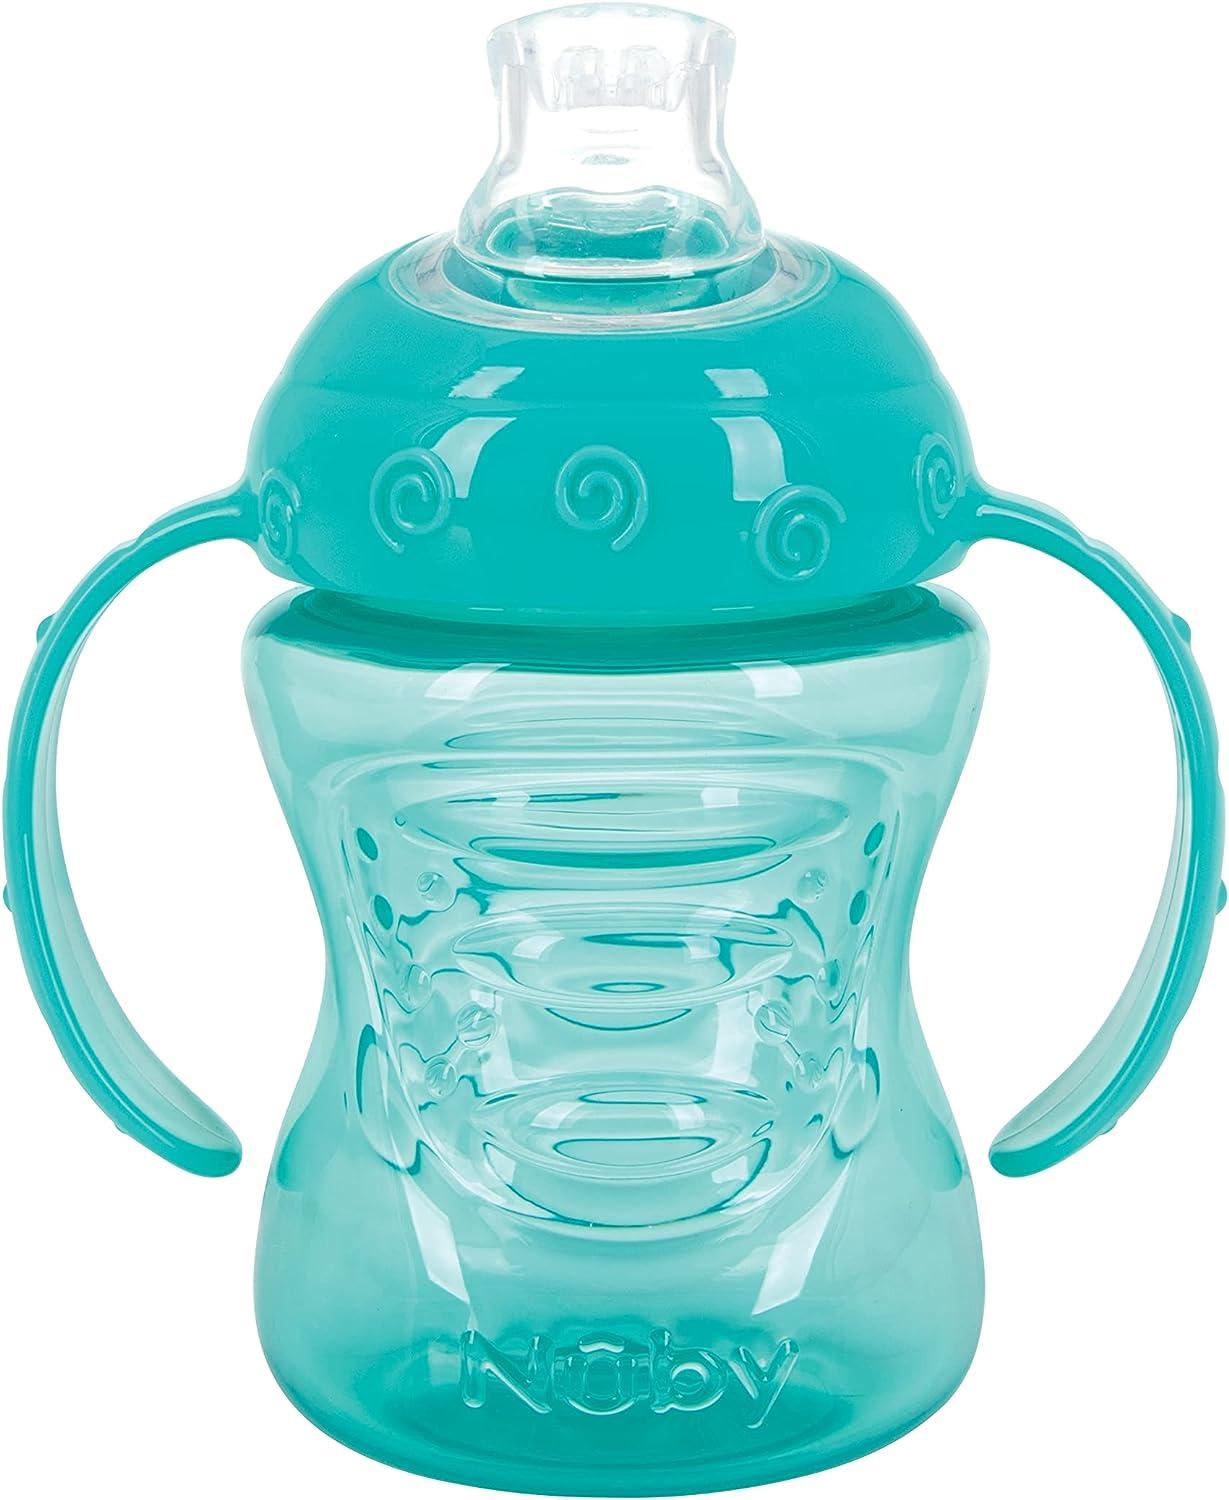 Nuby Montnegro. Two Handle No-Spill™Cup